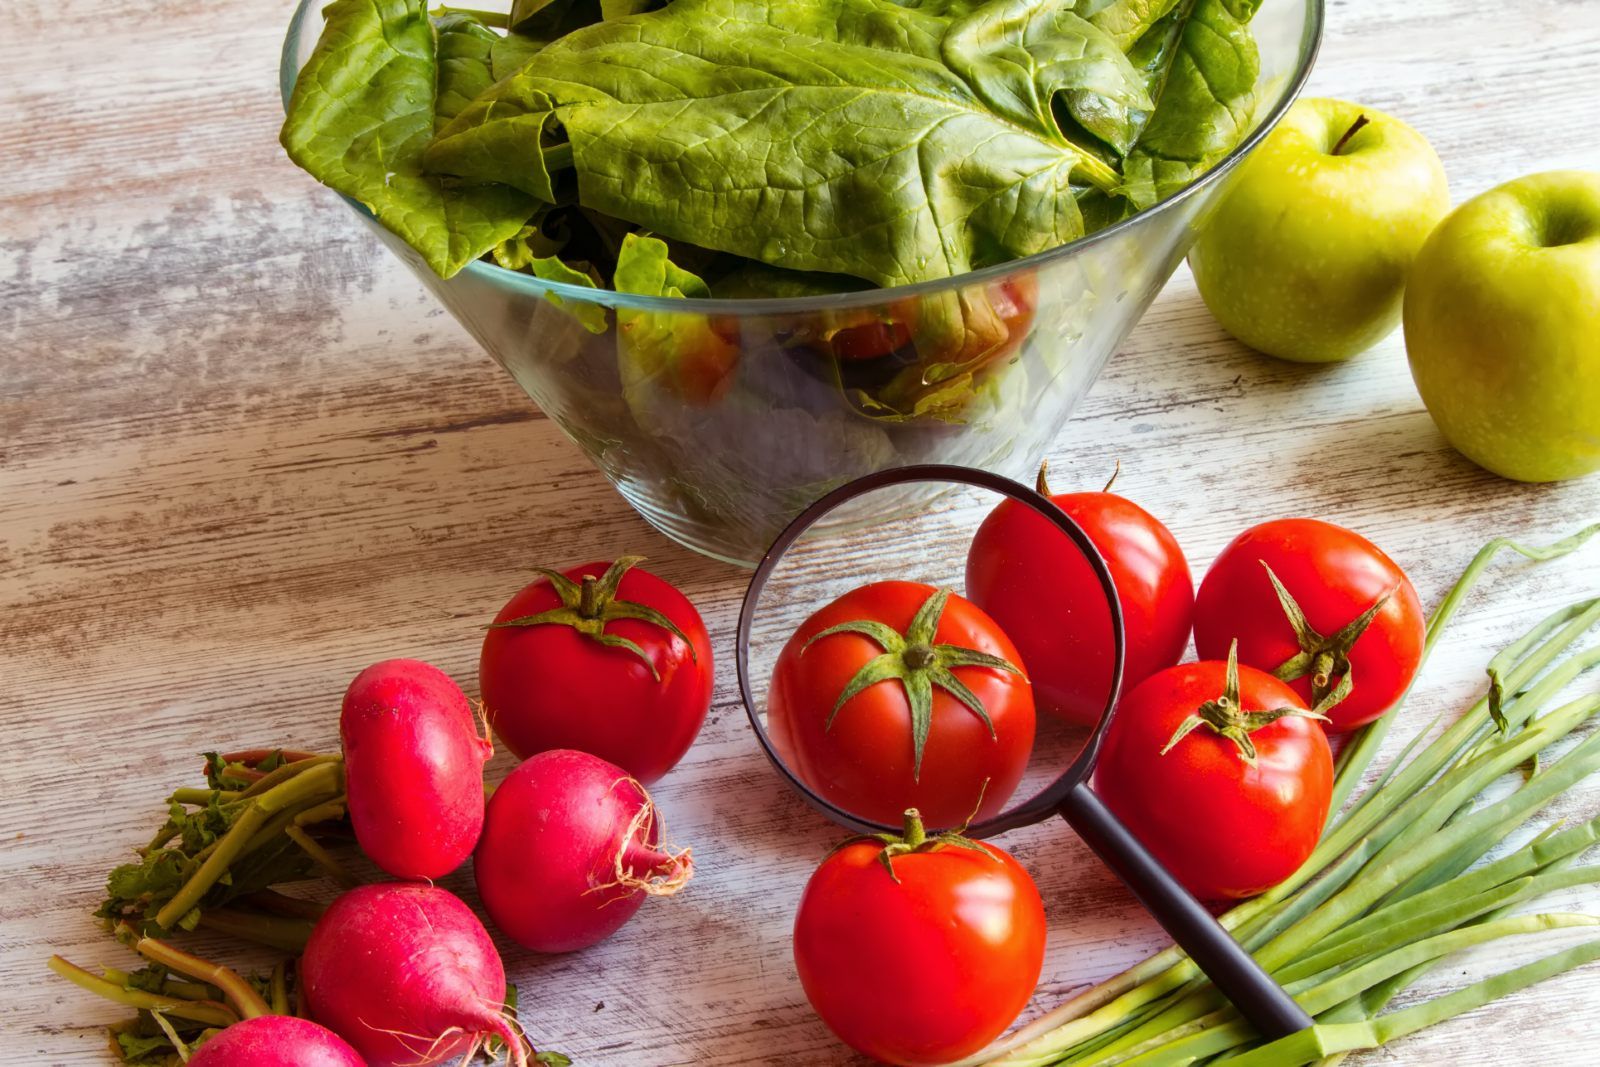 Produce sits in and near a glass bowl, with a magnifying glass lying on top of tomatoes - chemicals in food